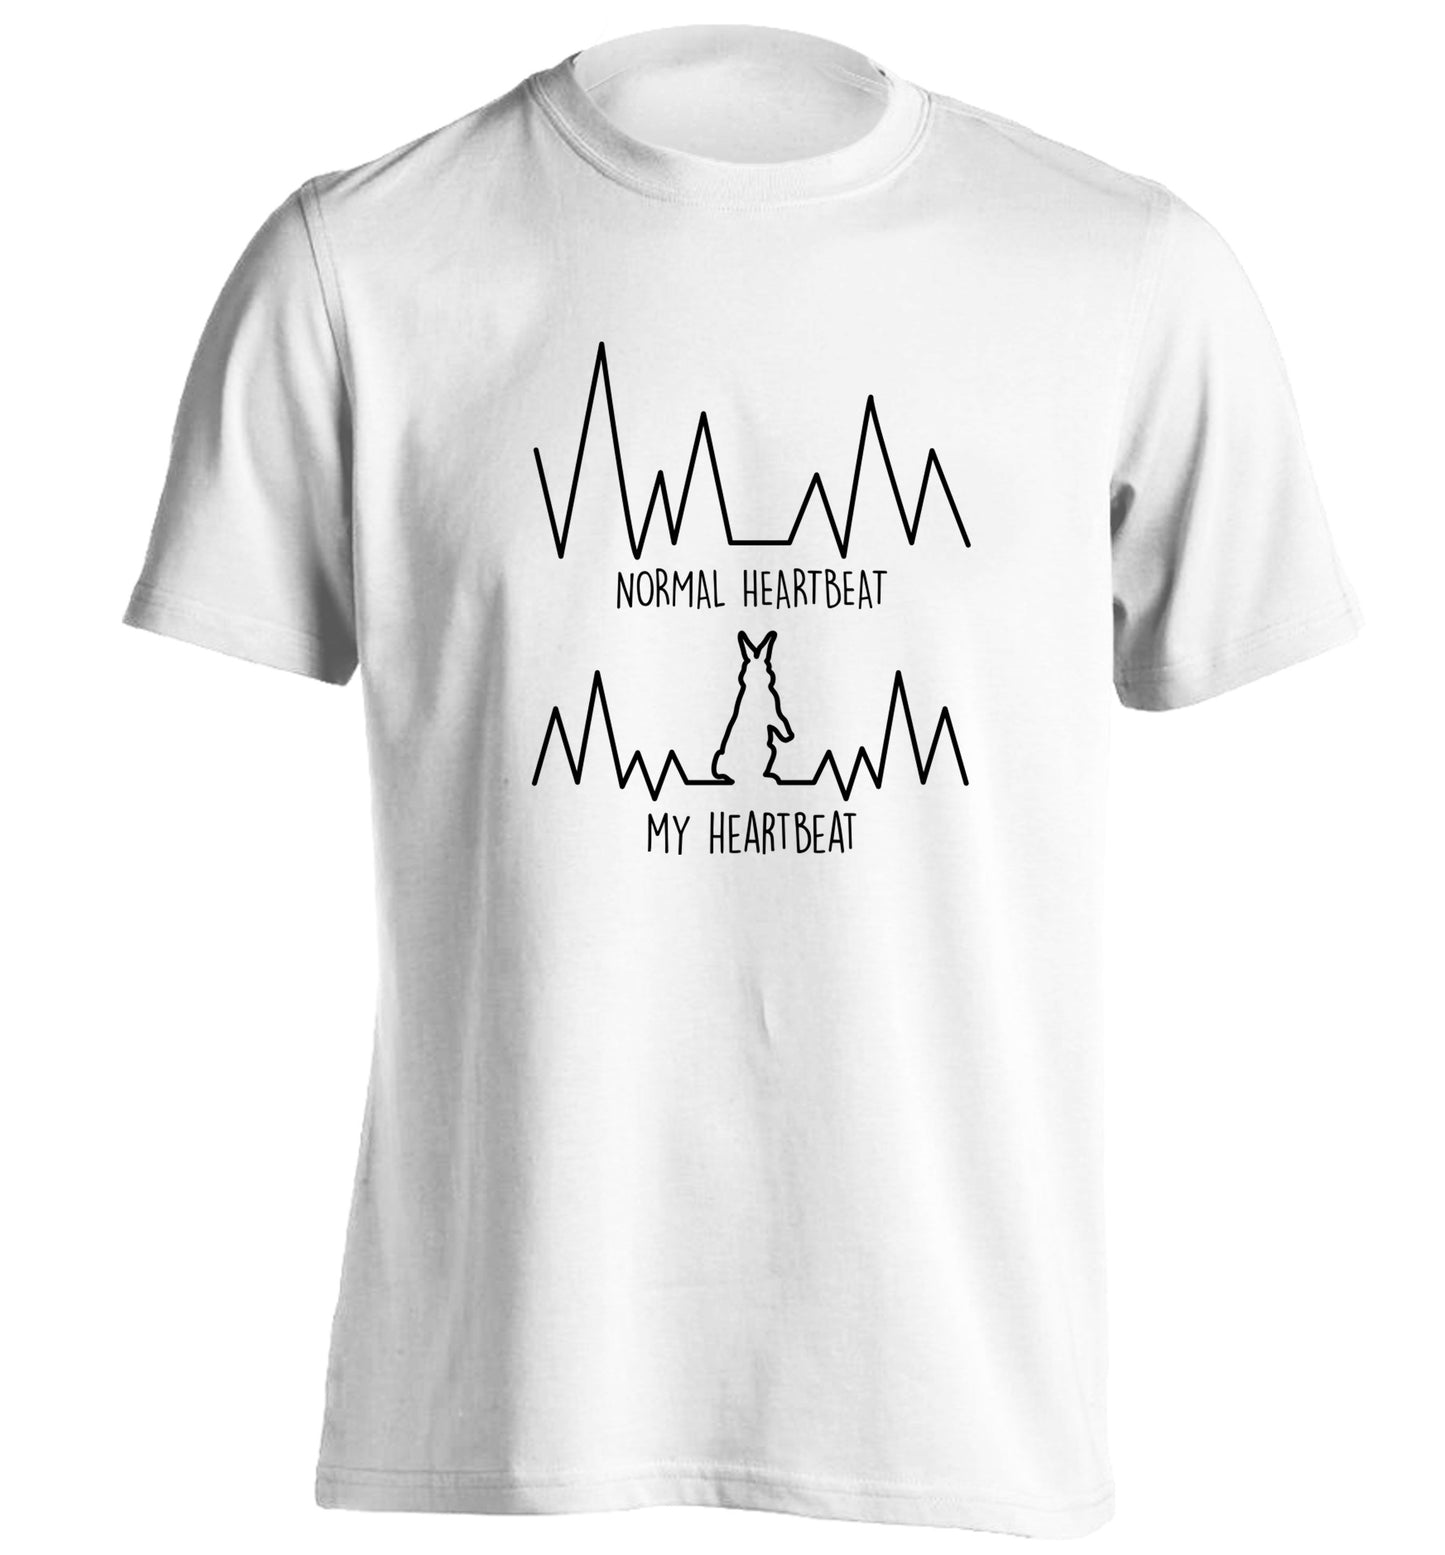 Normal heartbeat, my heartbeat rabbit lover adults unisex white Tshirt 2XL